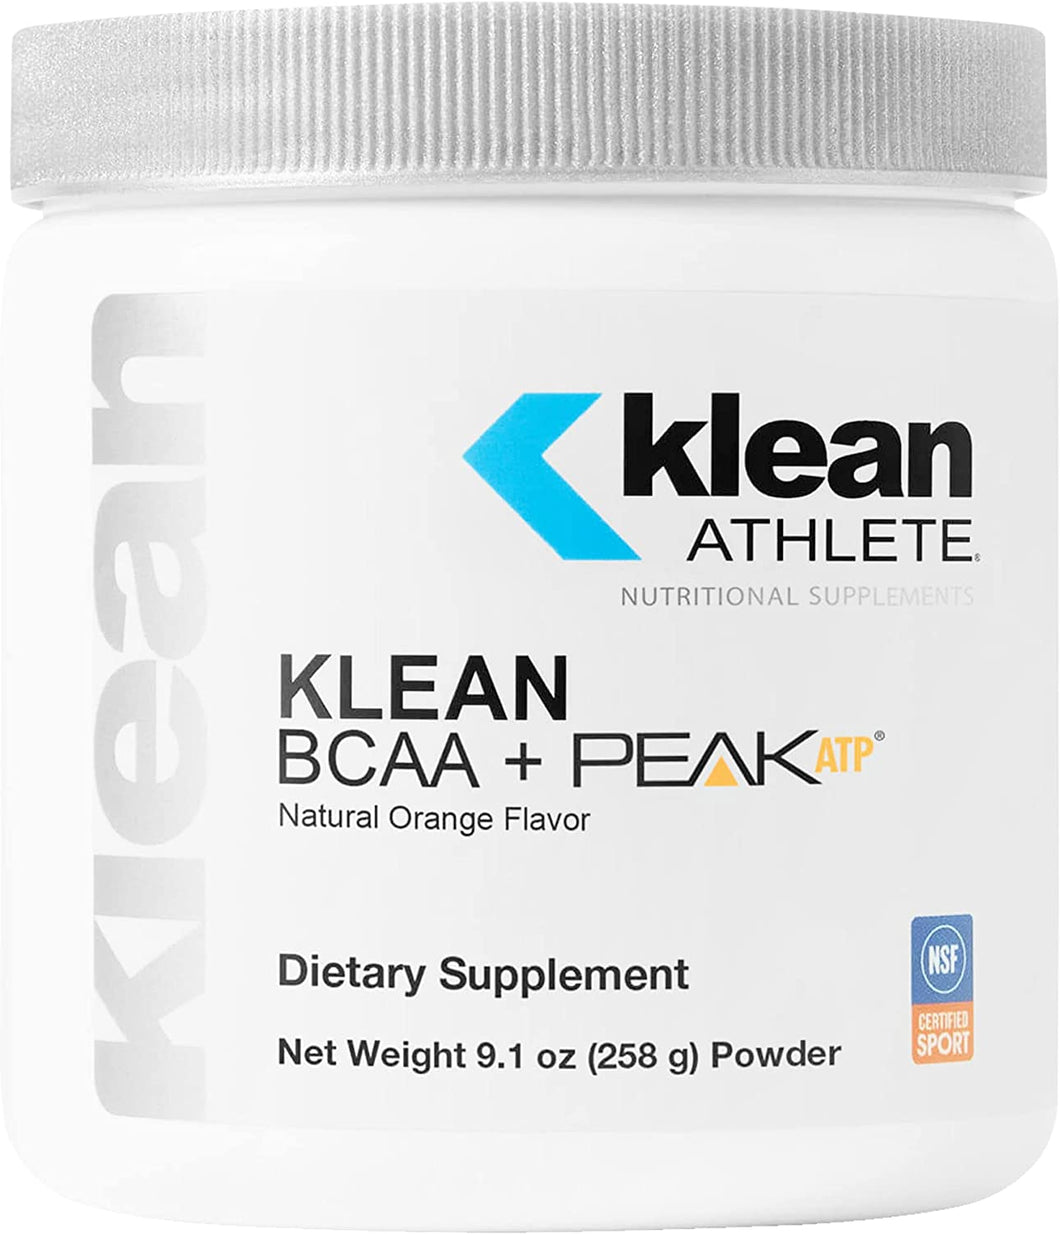 Klean BCAA + Peak ATP | Amino Acid Supplement for Muscle Building, Workout Recovery, and Lean Muscle | 9.1 Ounces | Natural Orange Flavor